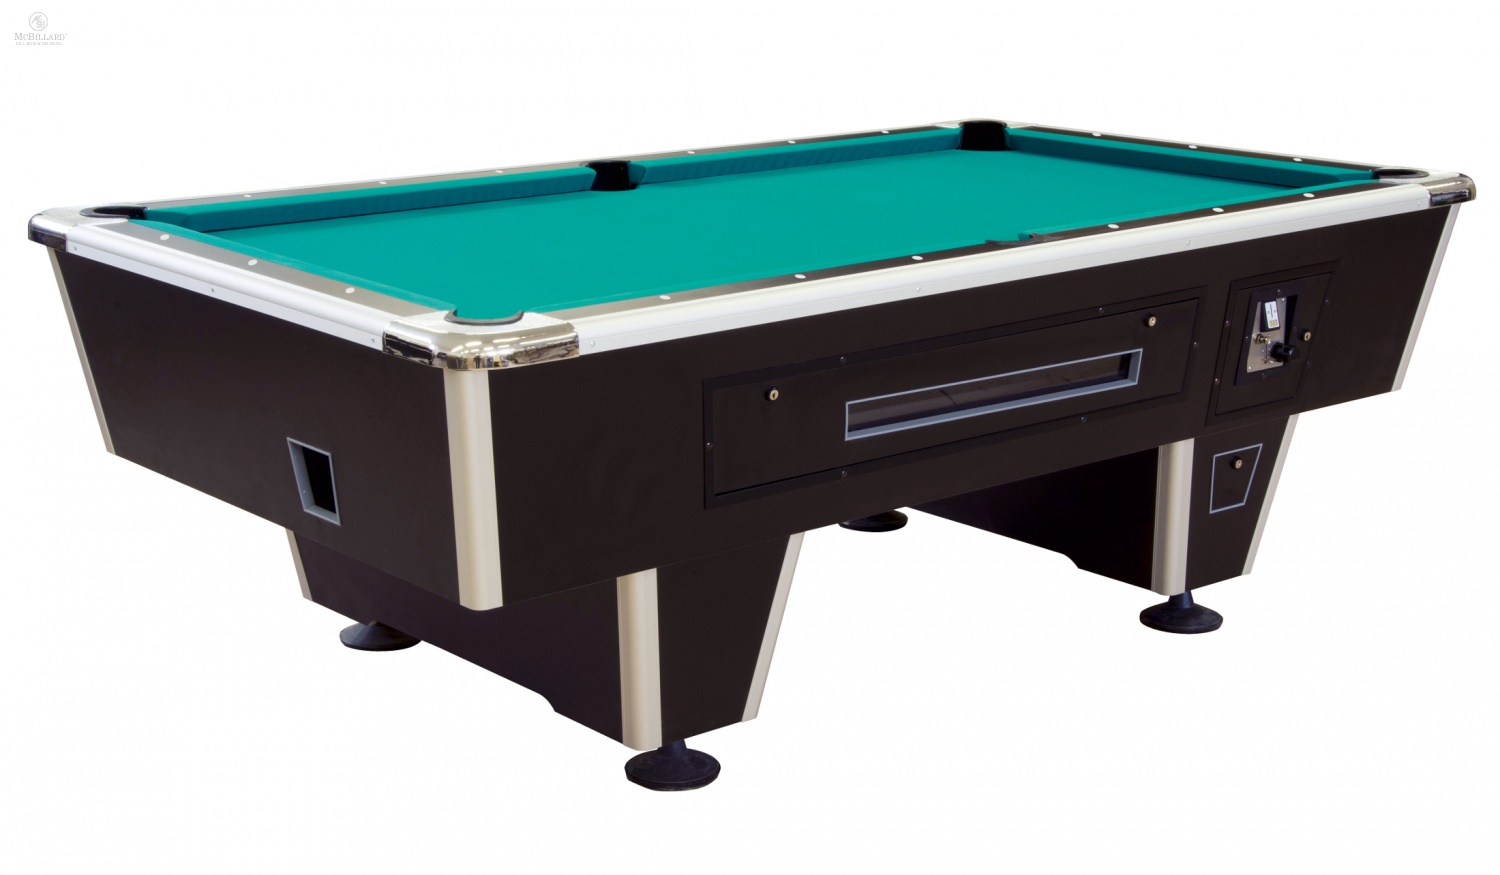 Pool Billiard Table - Orlando - with coin slot, 6 ft.